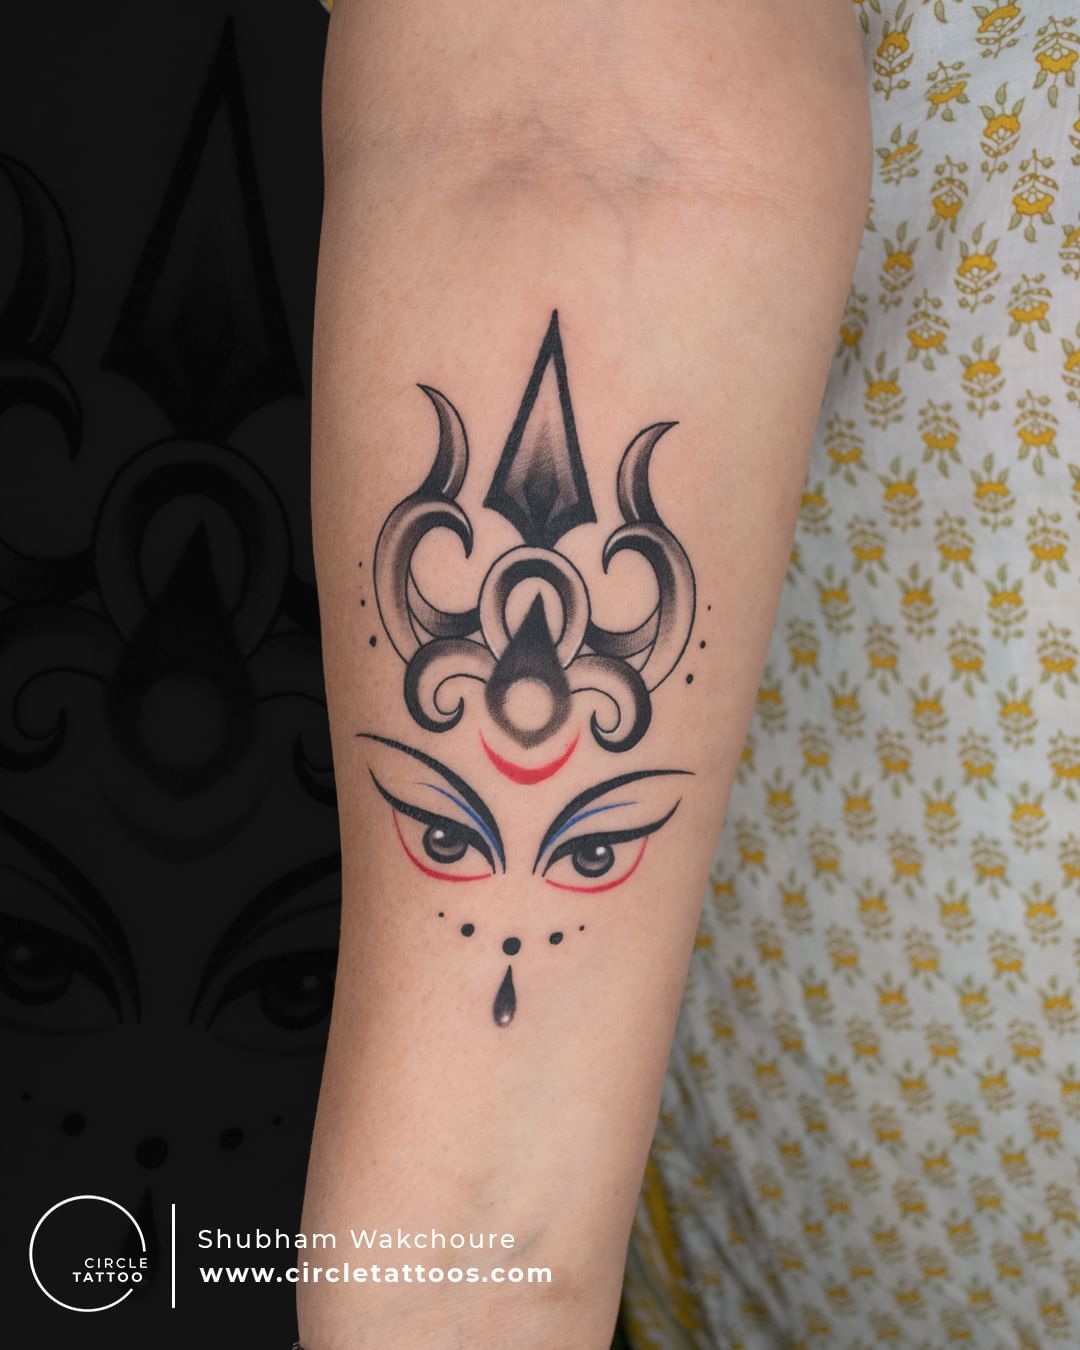 Would You Want To Get A Navratri Themed Tattoo This Season? Yay Or Nay? |  WhatsHot Delhi Ncr